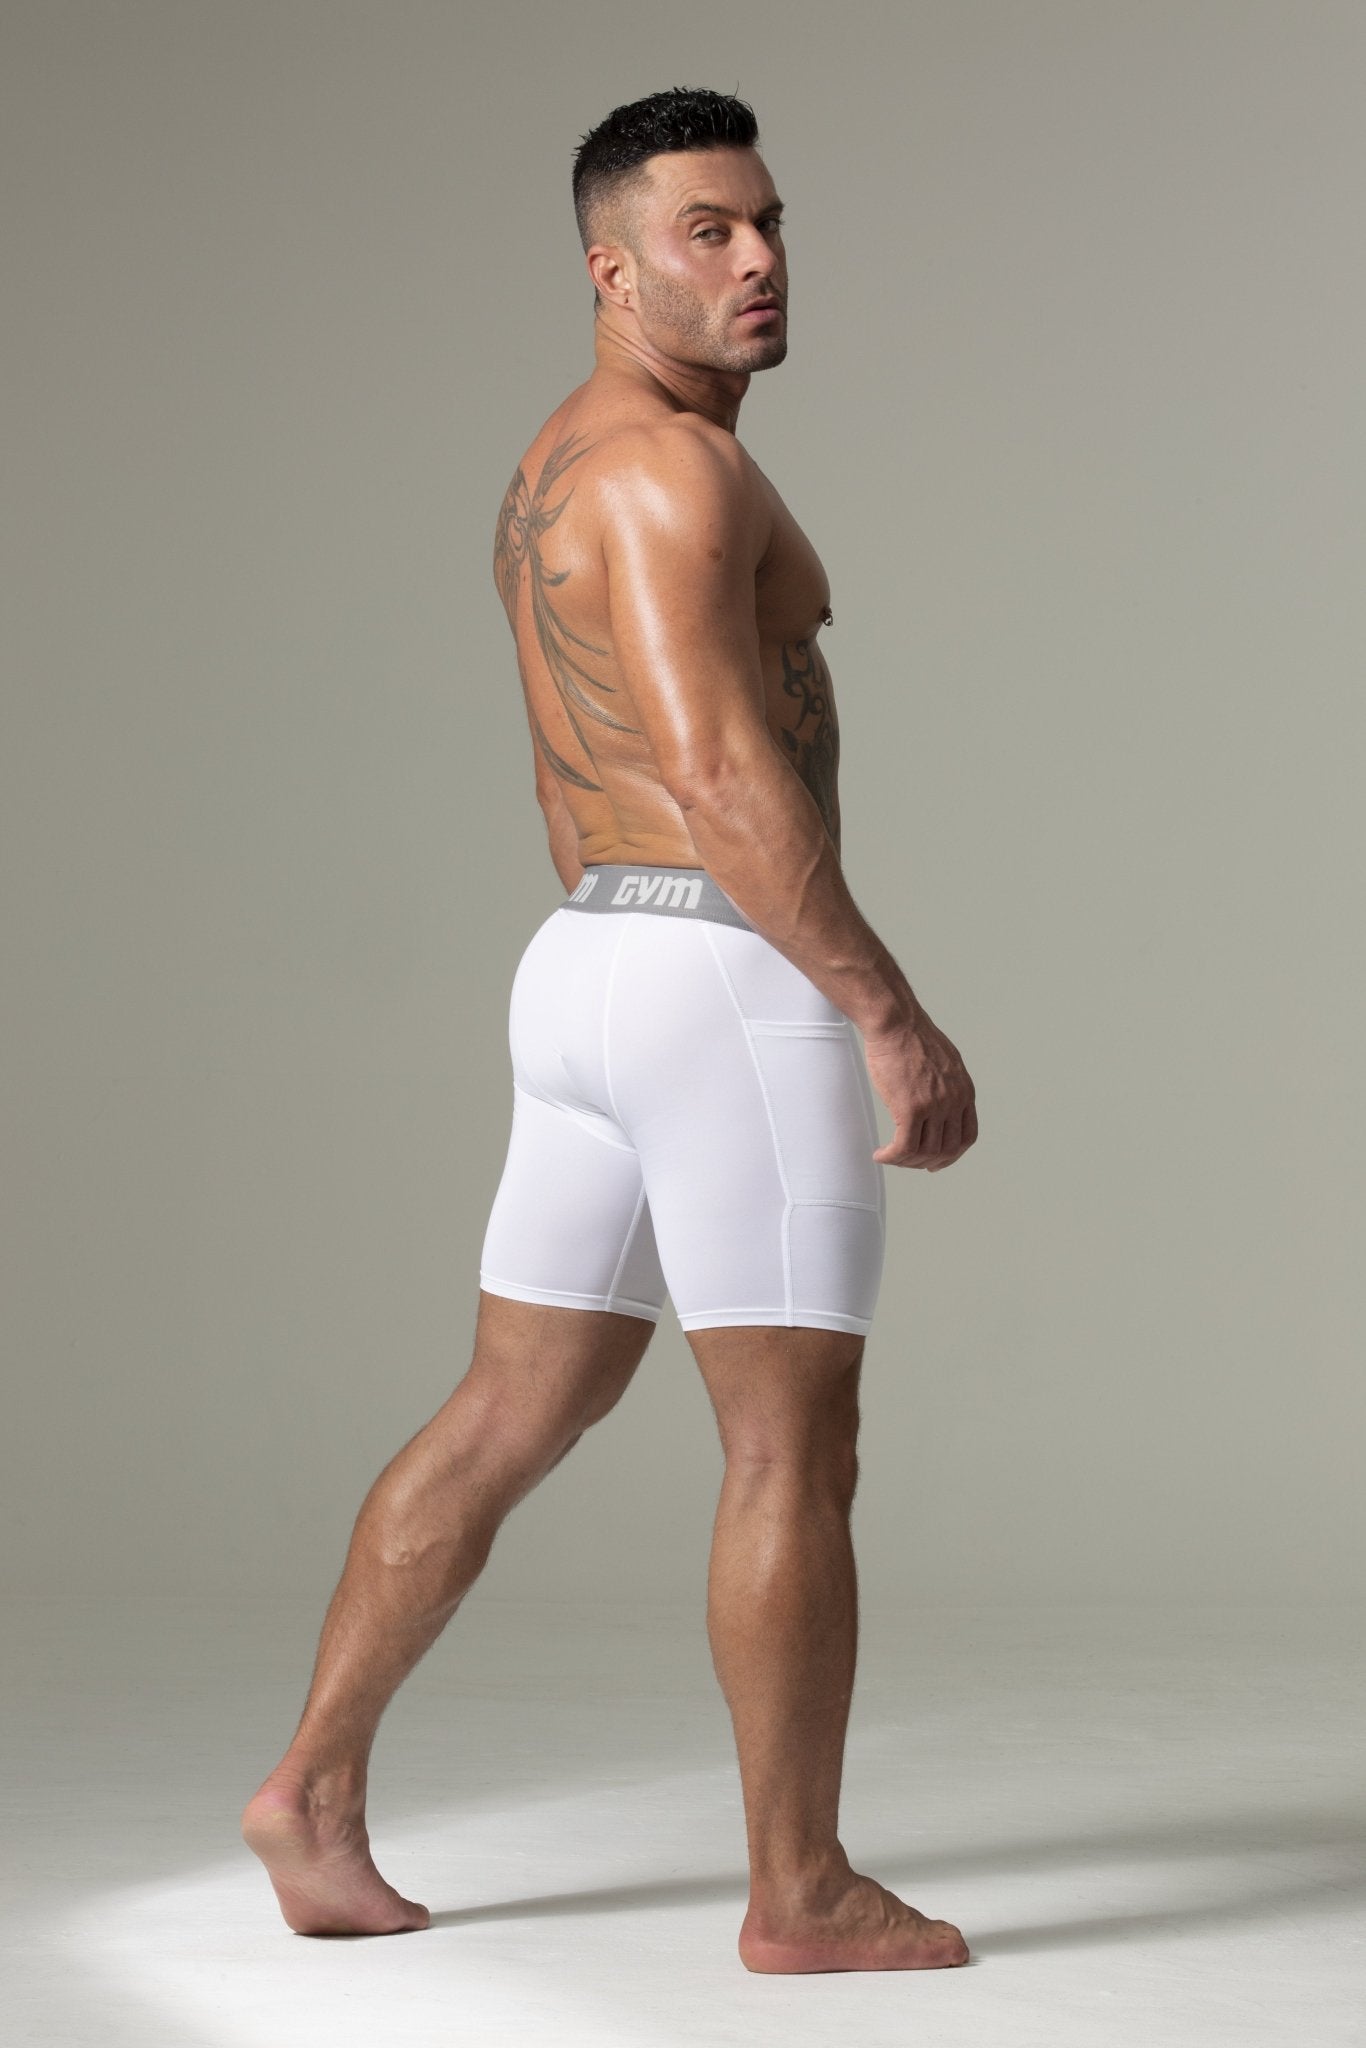 GYM Compression Short with Hard Cup Included - Jockstraps.com